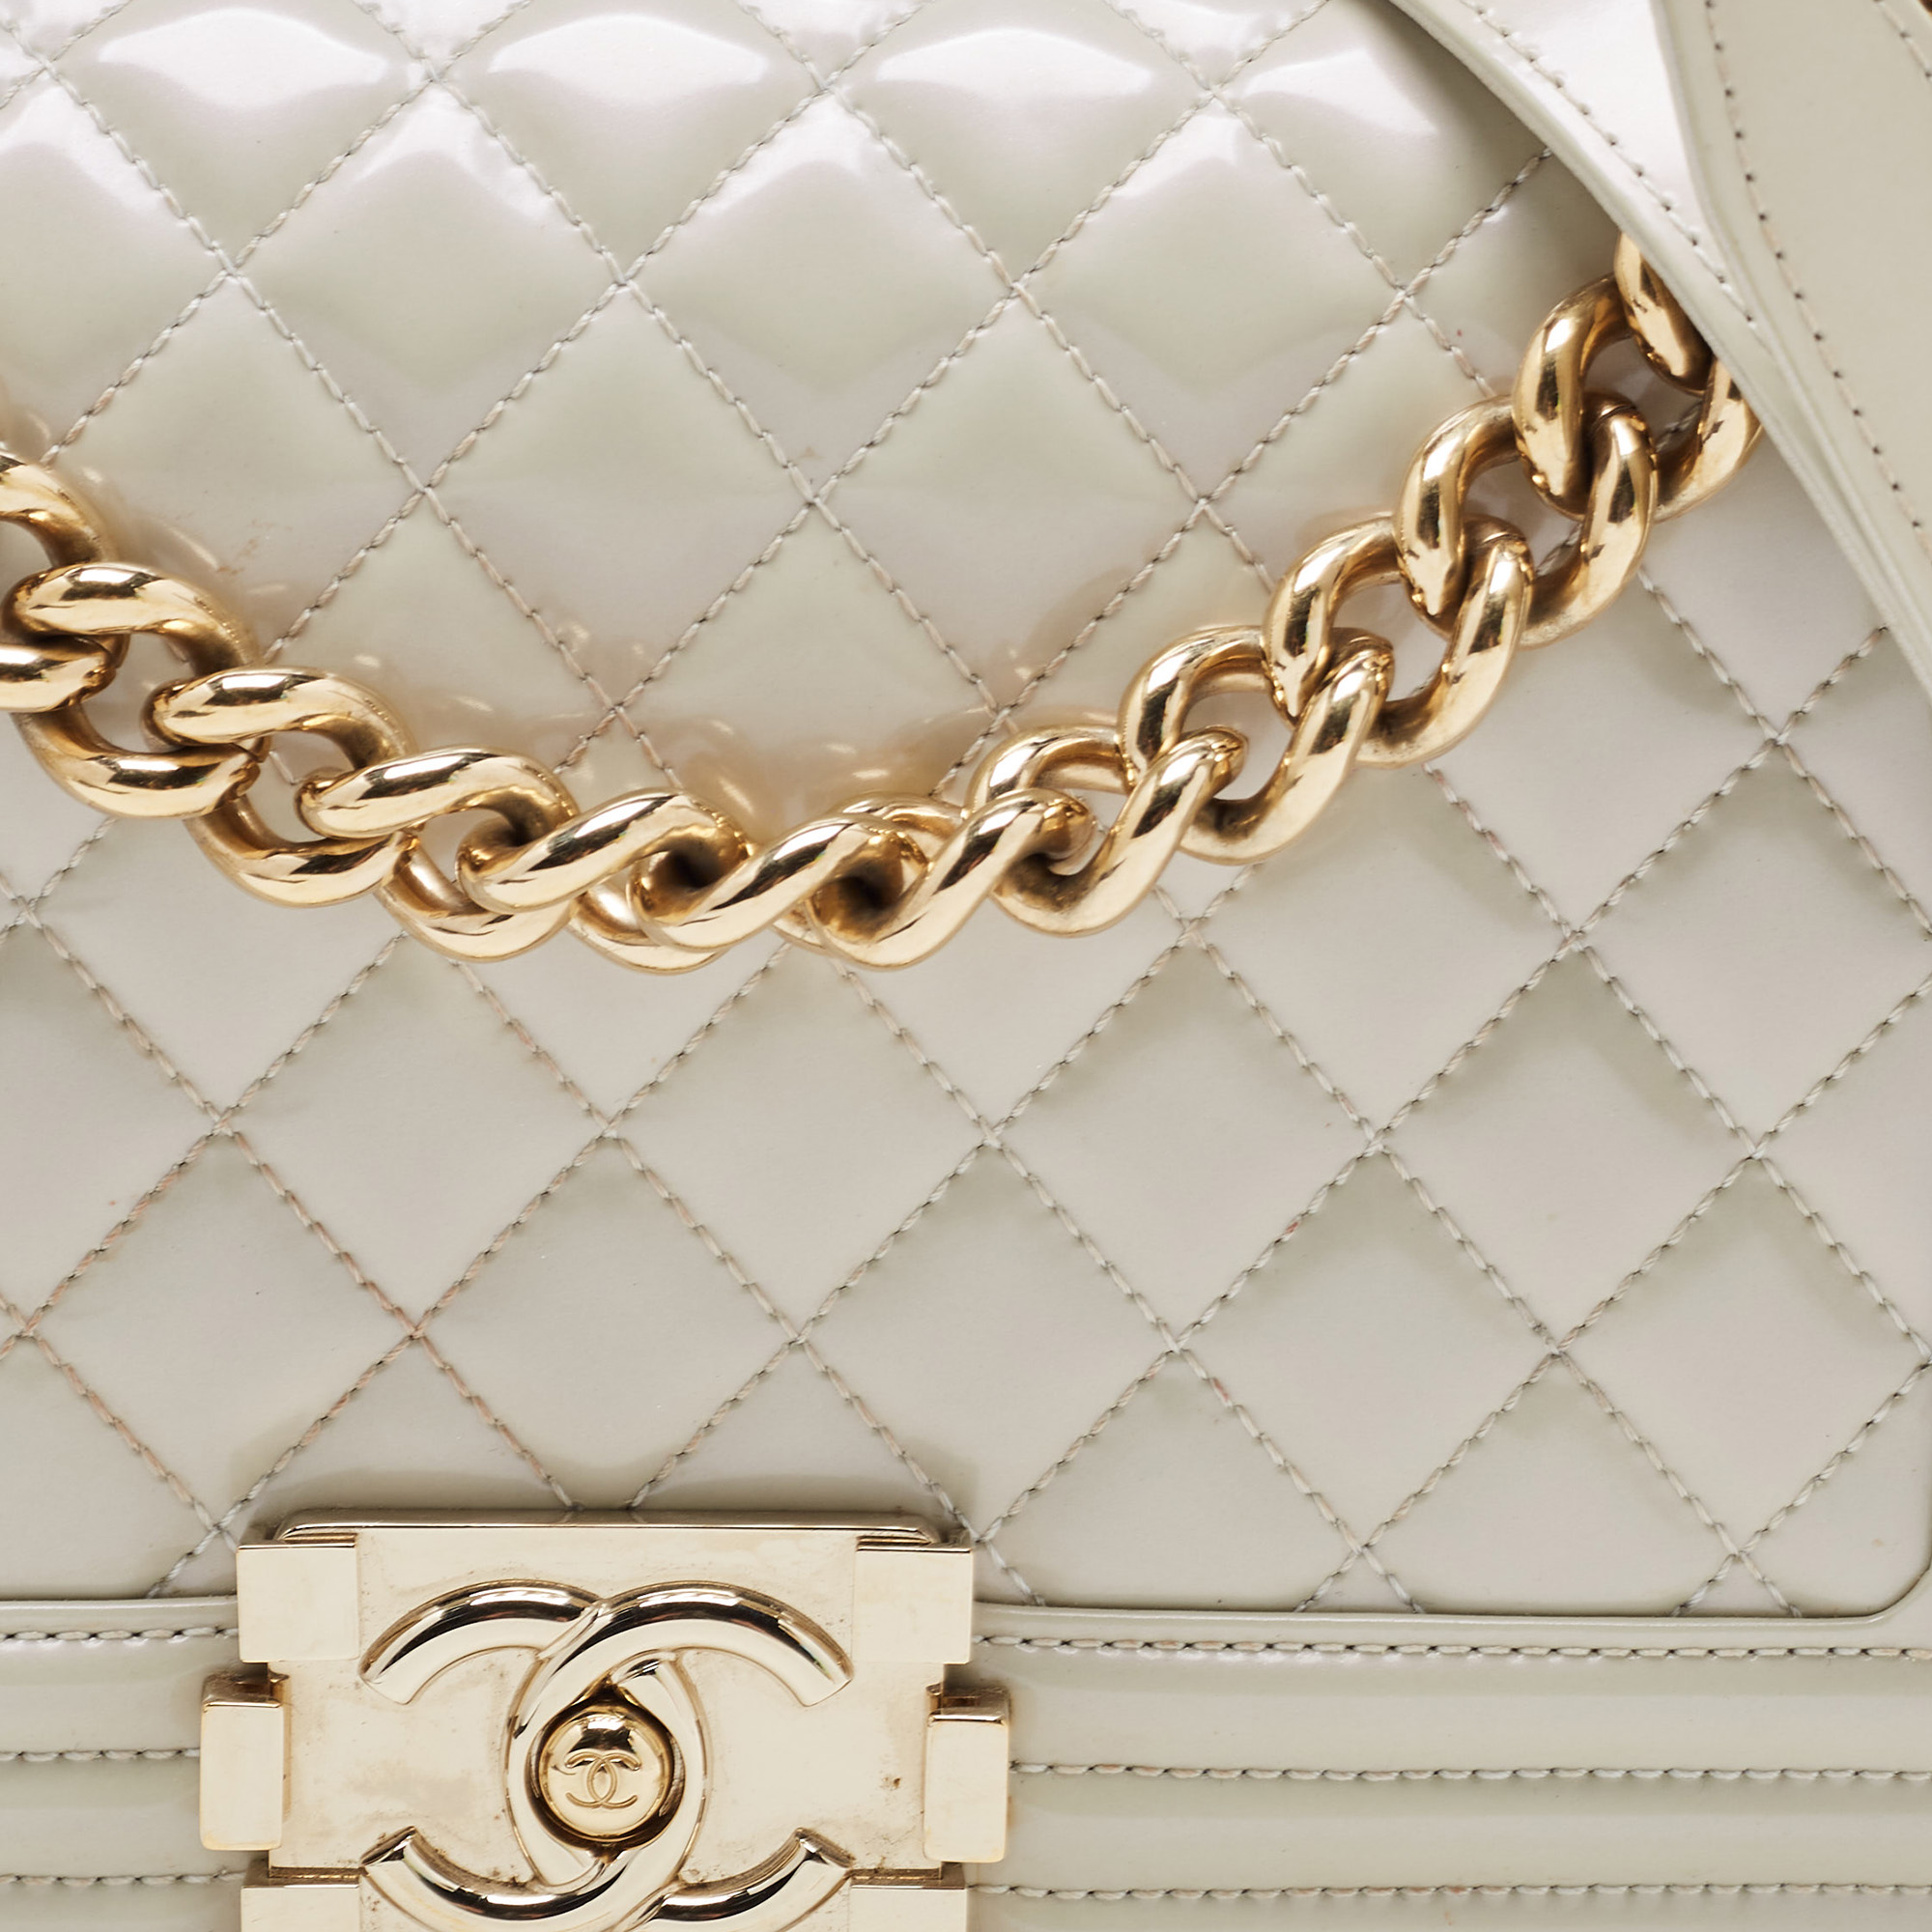 Chanel Pearl White Quilted Patent Leather Medium Boy Flap Bag